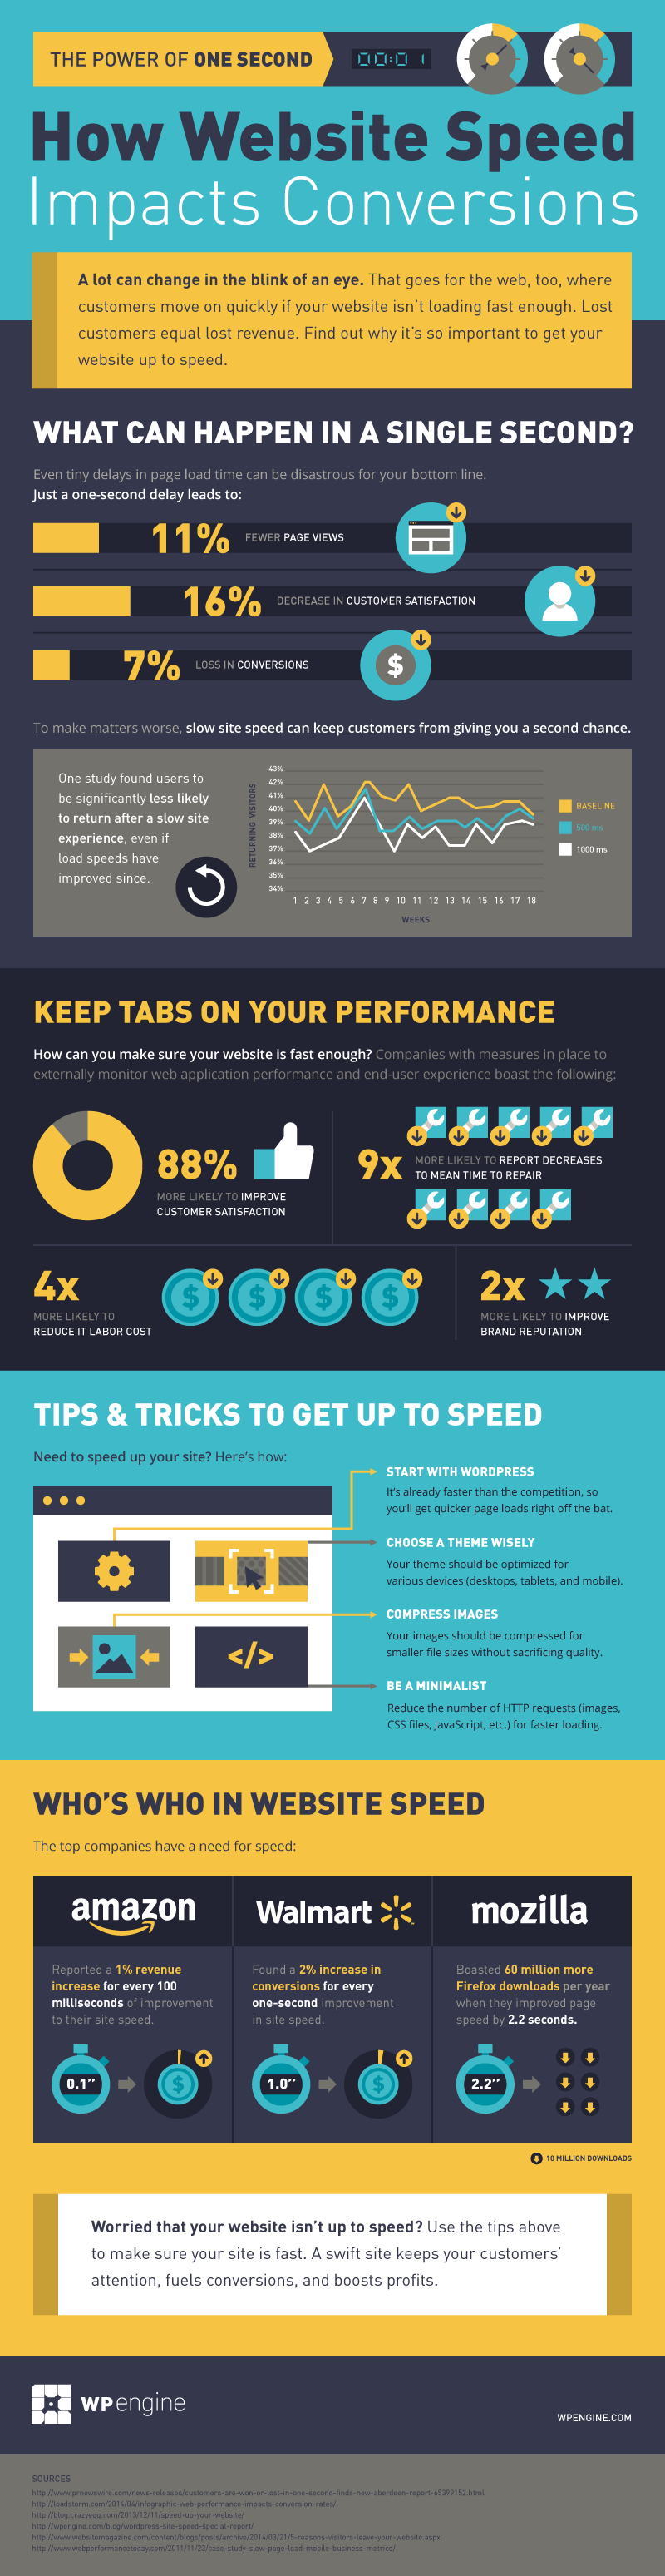 Website Page Load Speed Critical To Lead Generation, Lead Conversion, and Sales